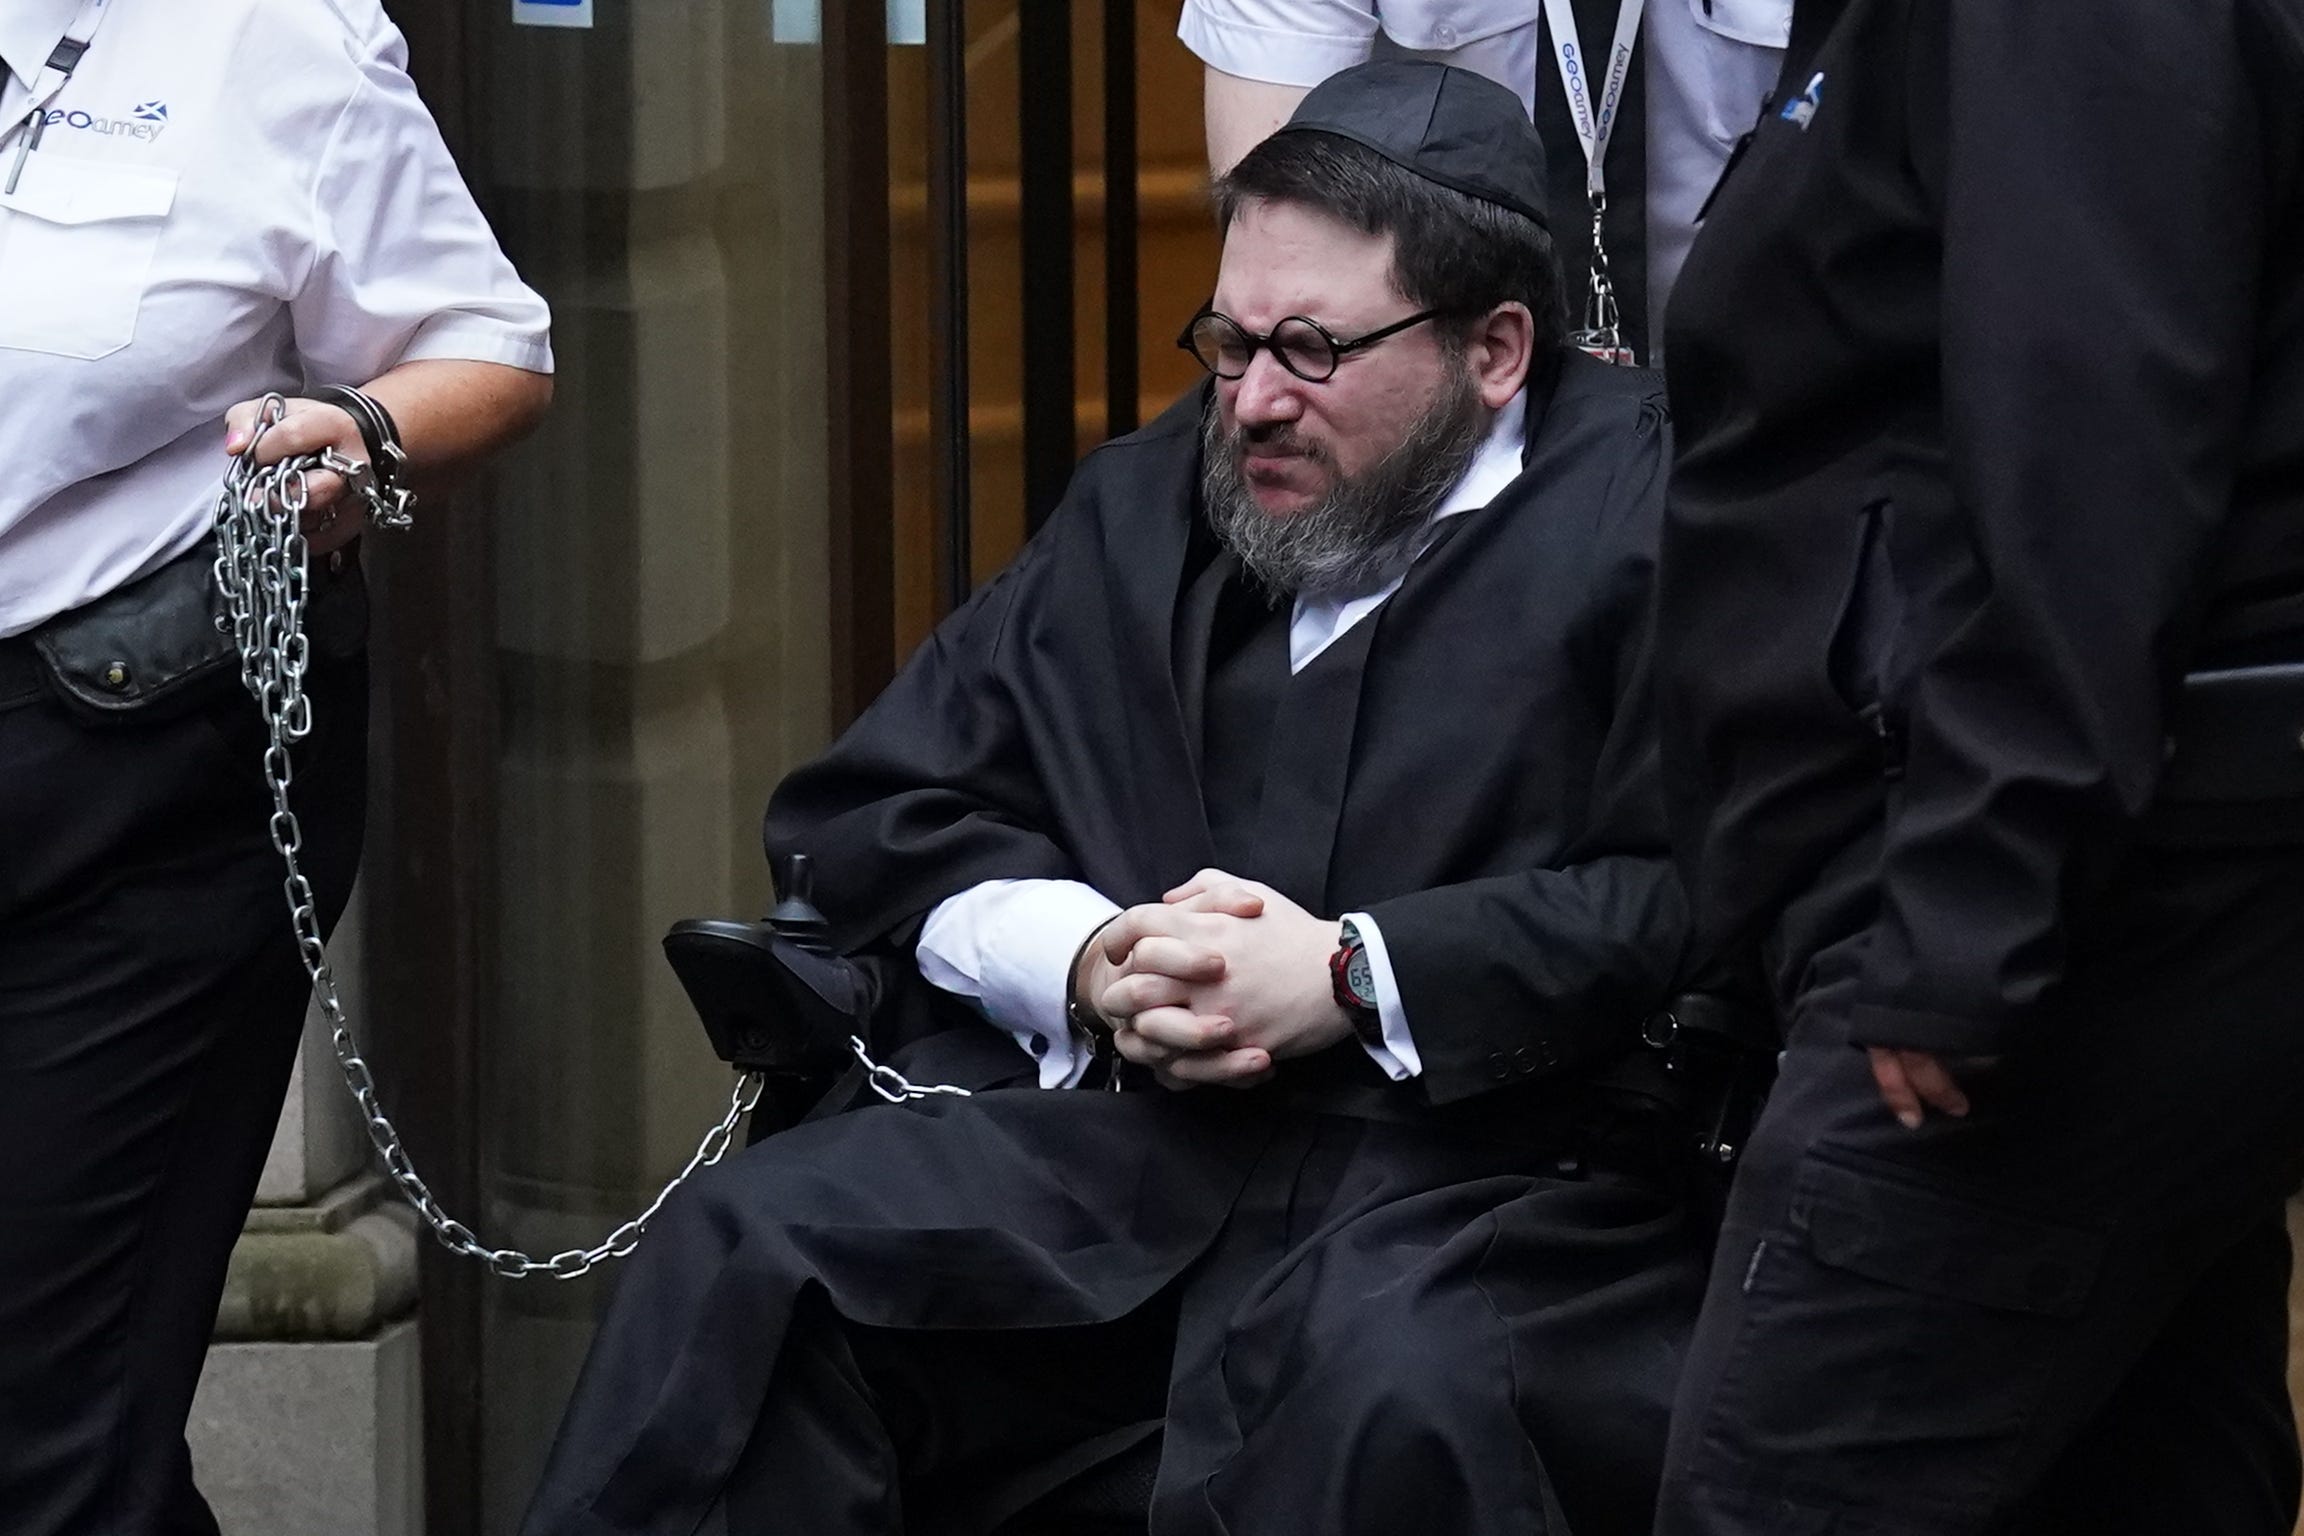 Nicholas Rossi converted to Judaism while in HMP Edinburgh, where he has been held since 2022